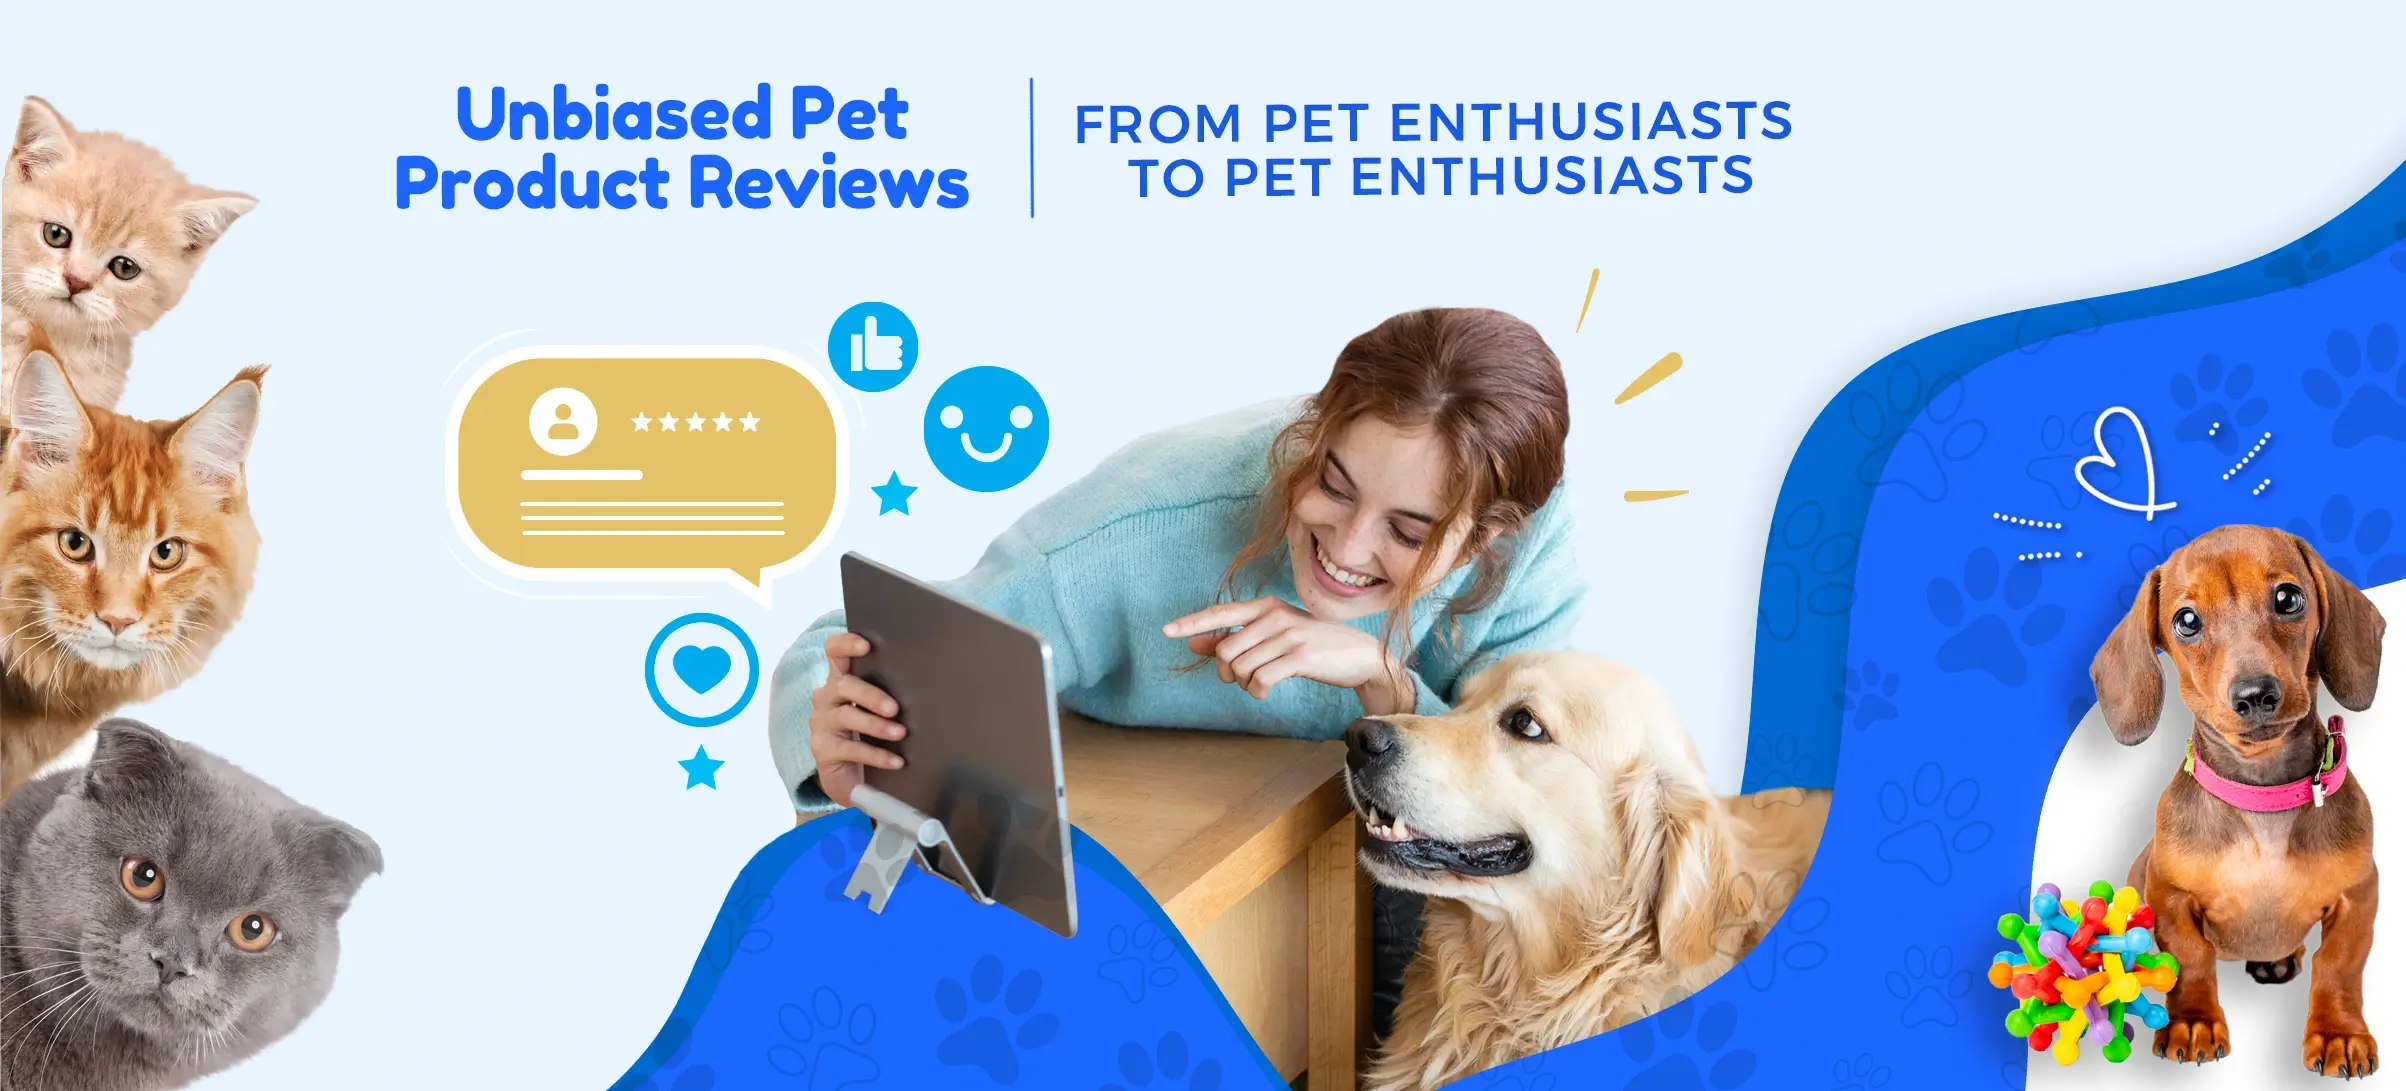 Unbiased Pet Product Reviews from Pet Enthusiasts to Pet Enthusiasts